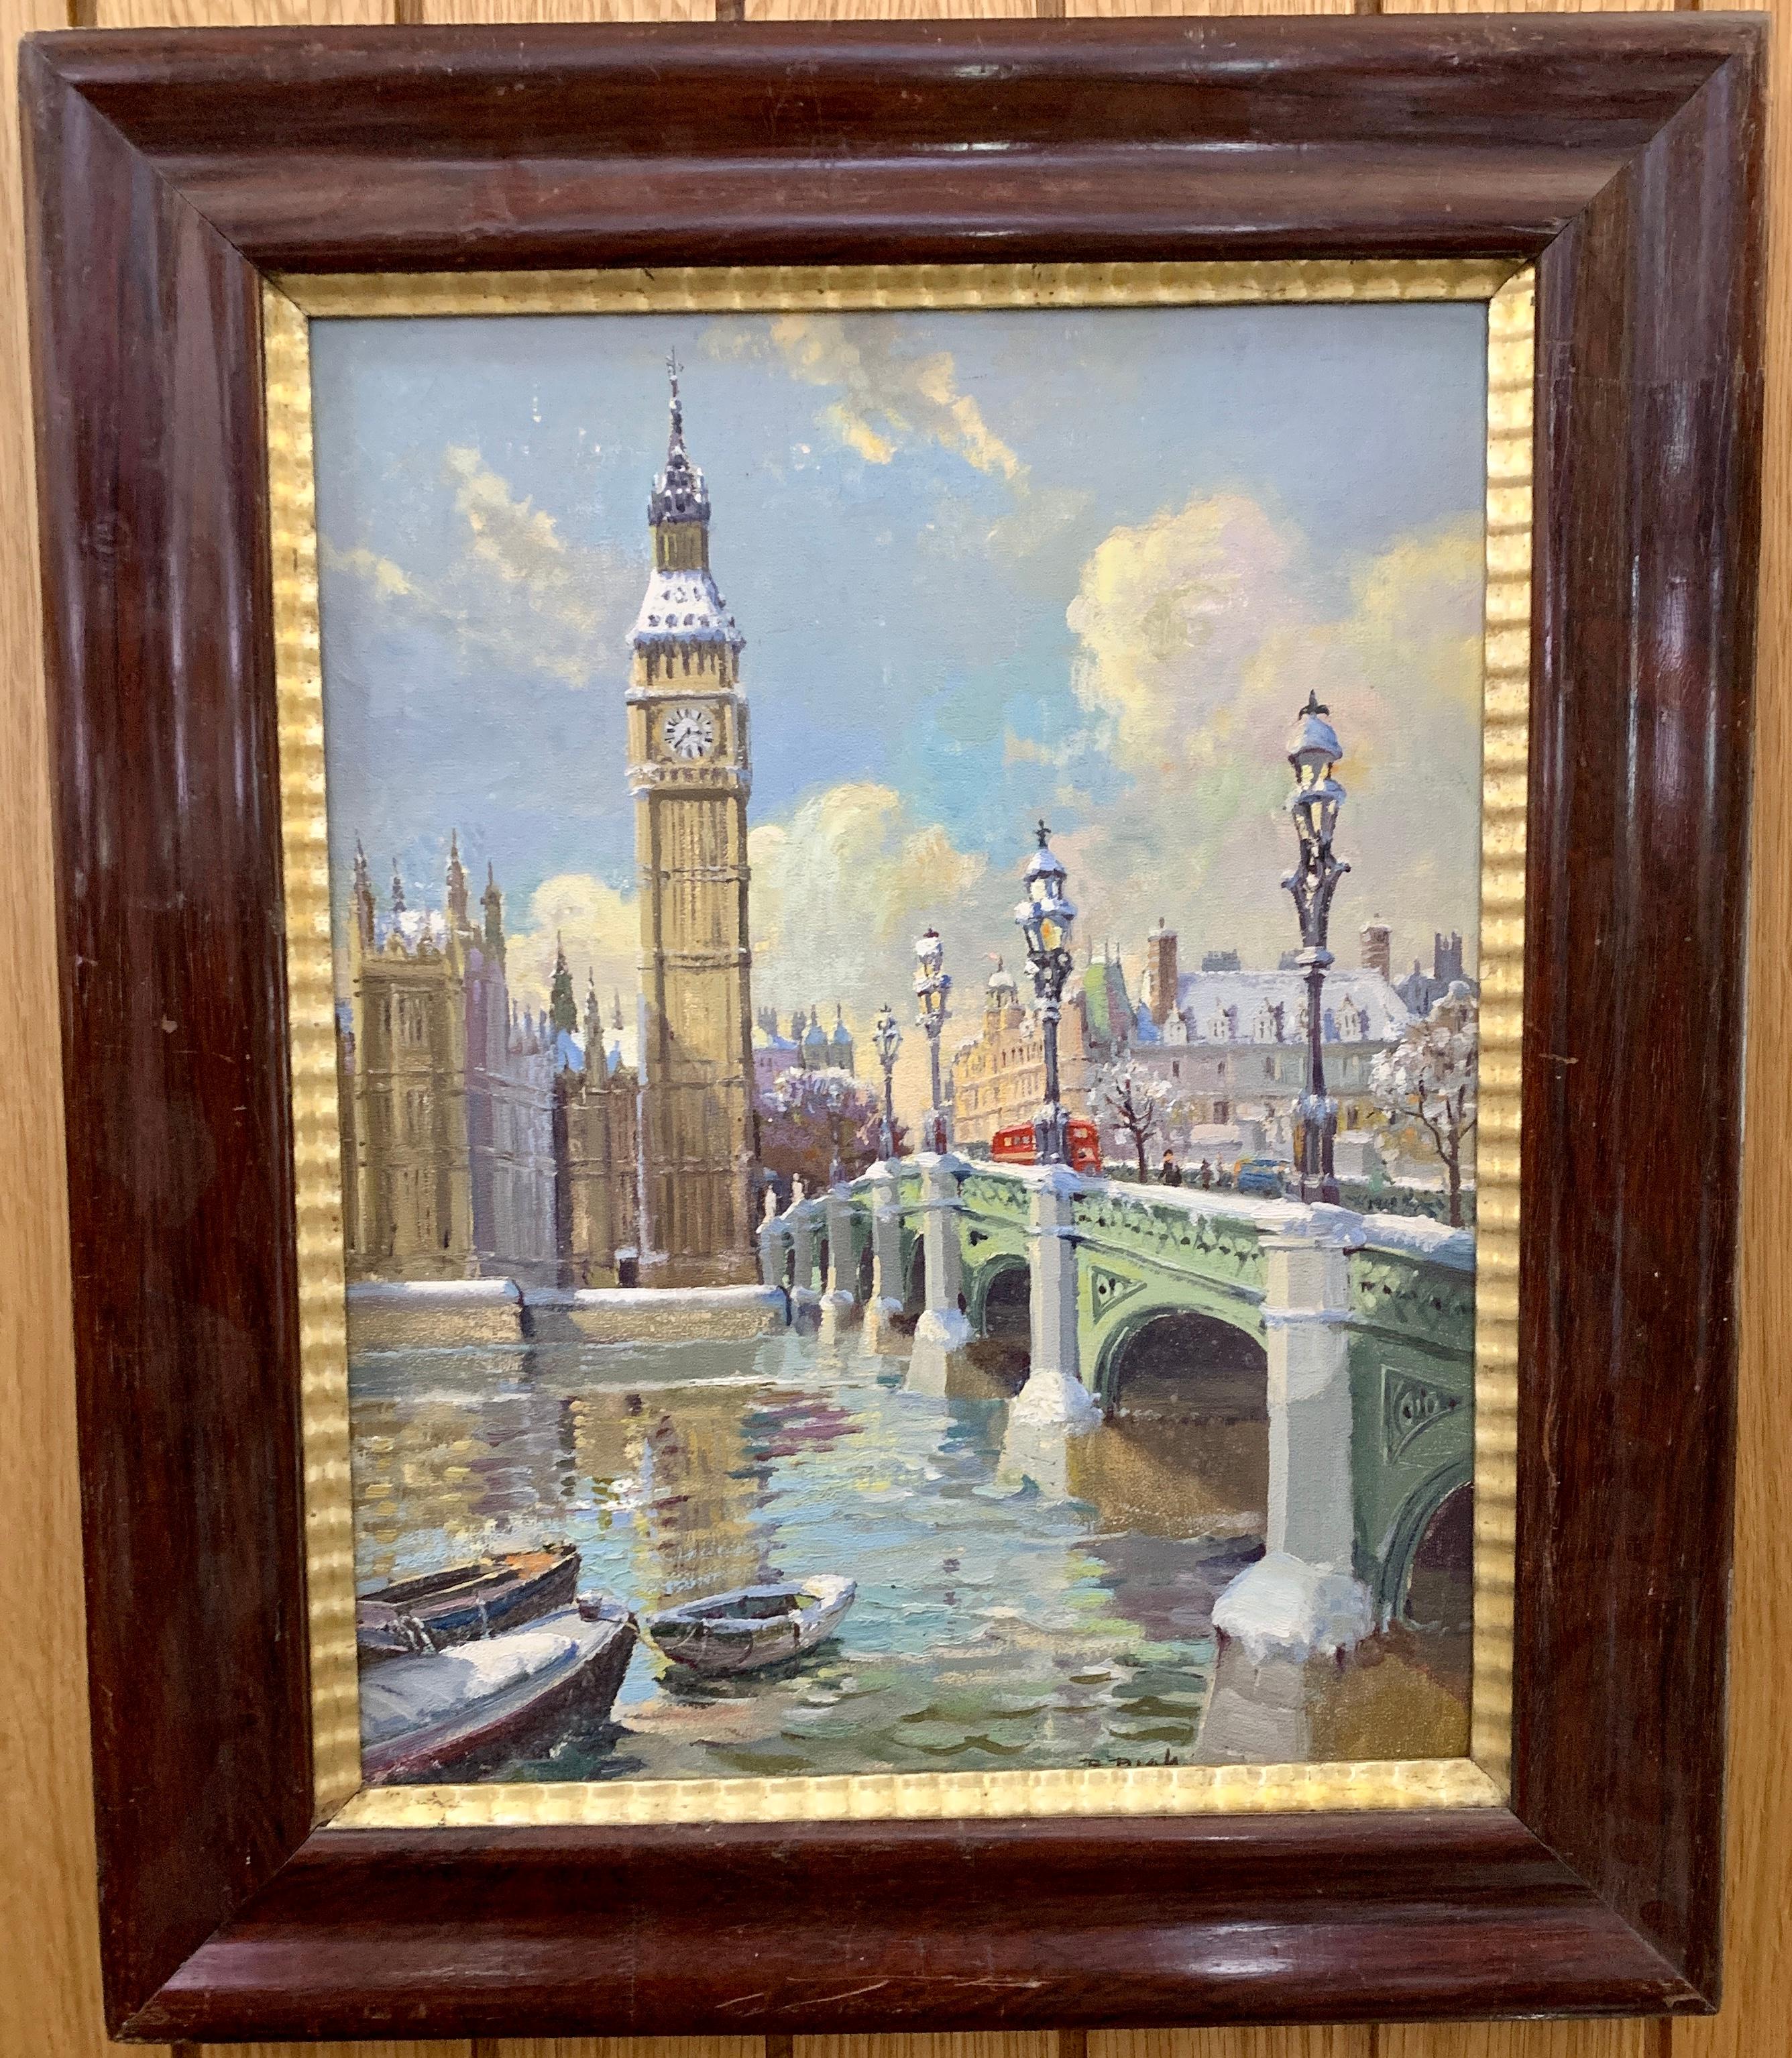 Bert Pugh Landscape Painting - Big Ben in London with London Bridge in the snow, by the River Thames, England